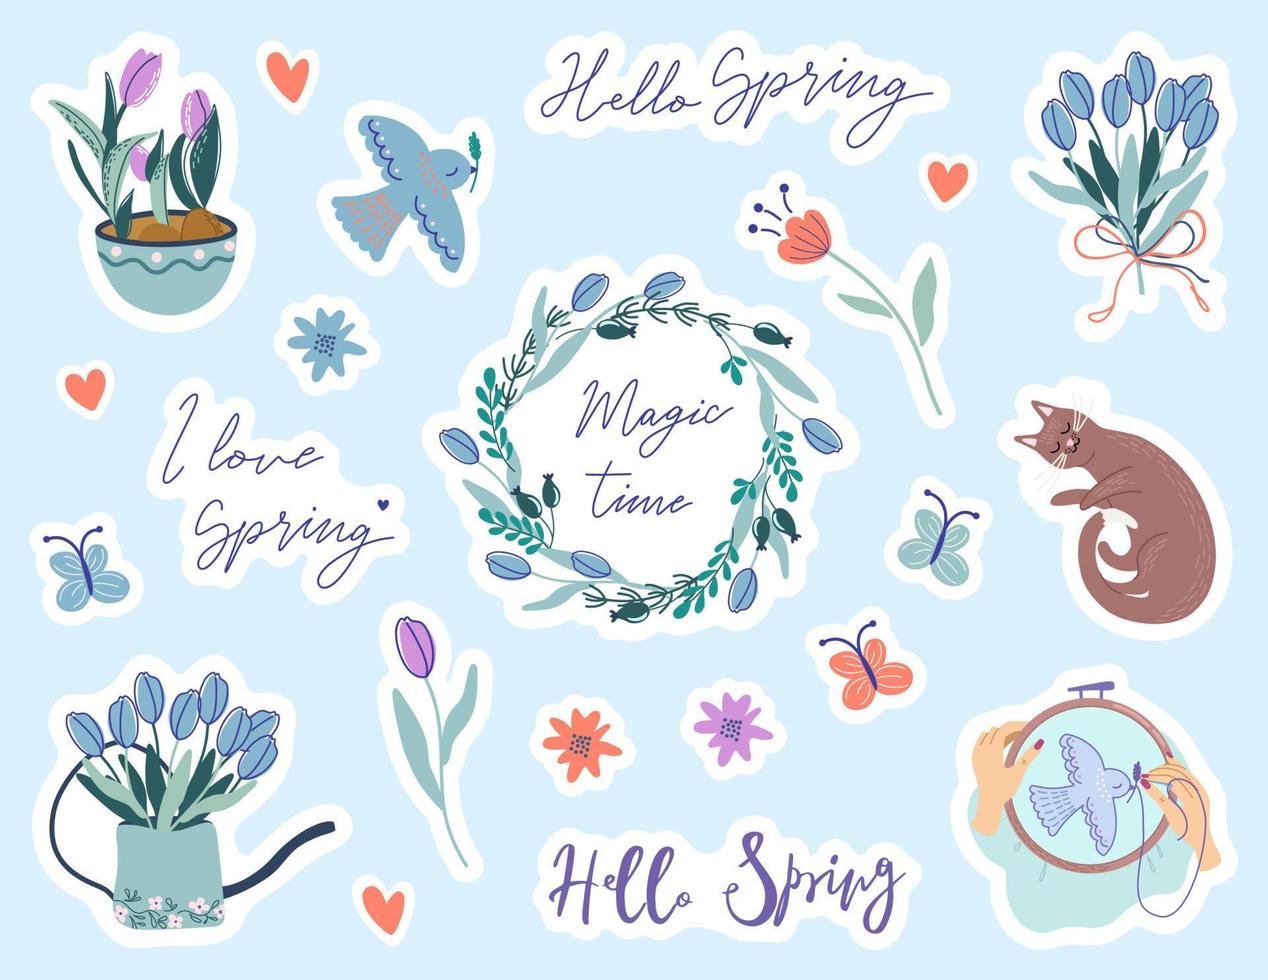 Hello Spring. Cute set of Springtime stickers. Vector doodle illustrations with text and graphic design elements. Perfect for planning, t-shirt prints, greeting cards, scrapbooking.